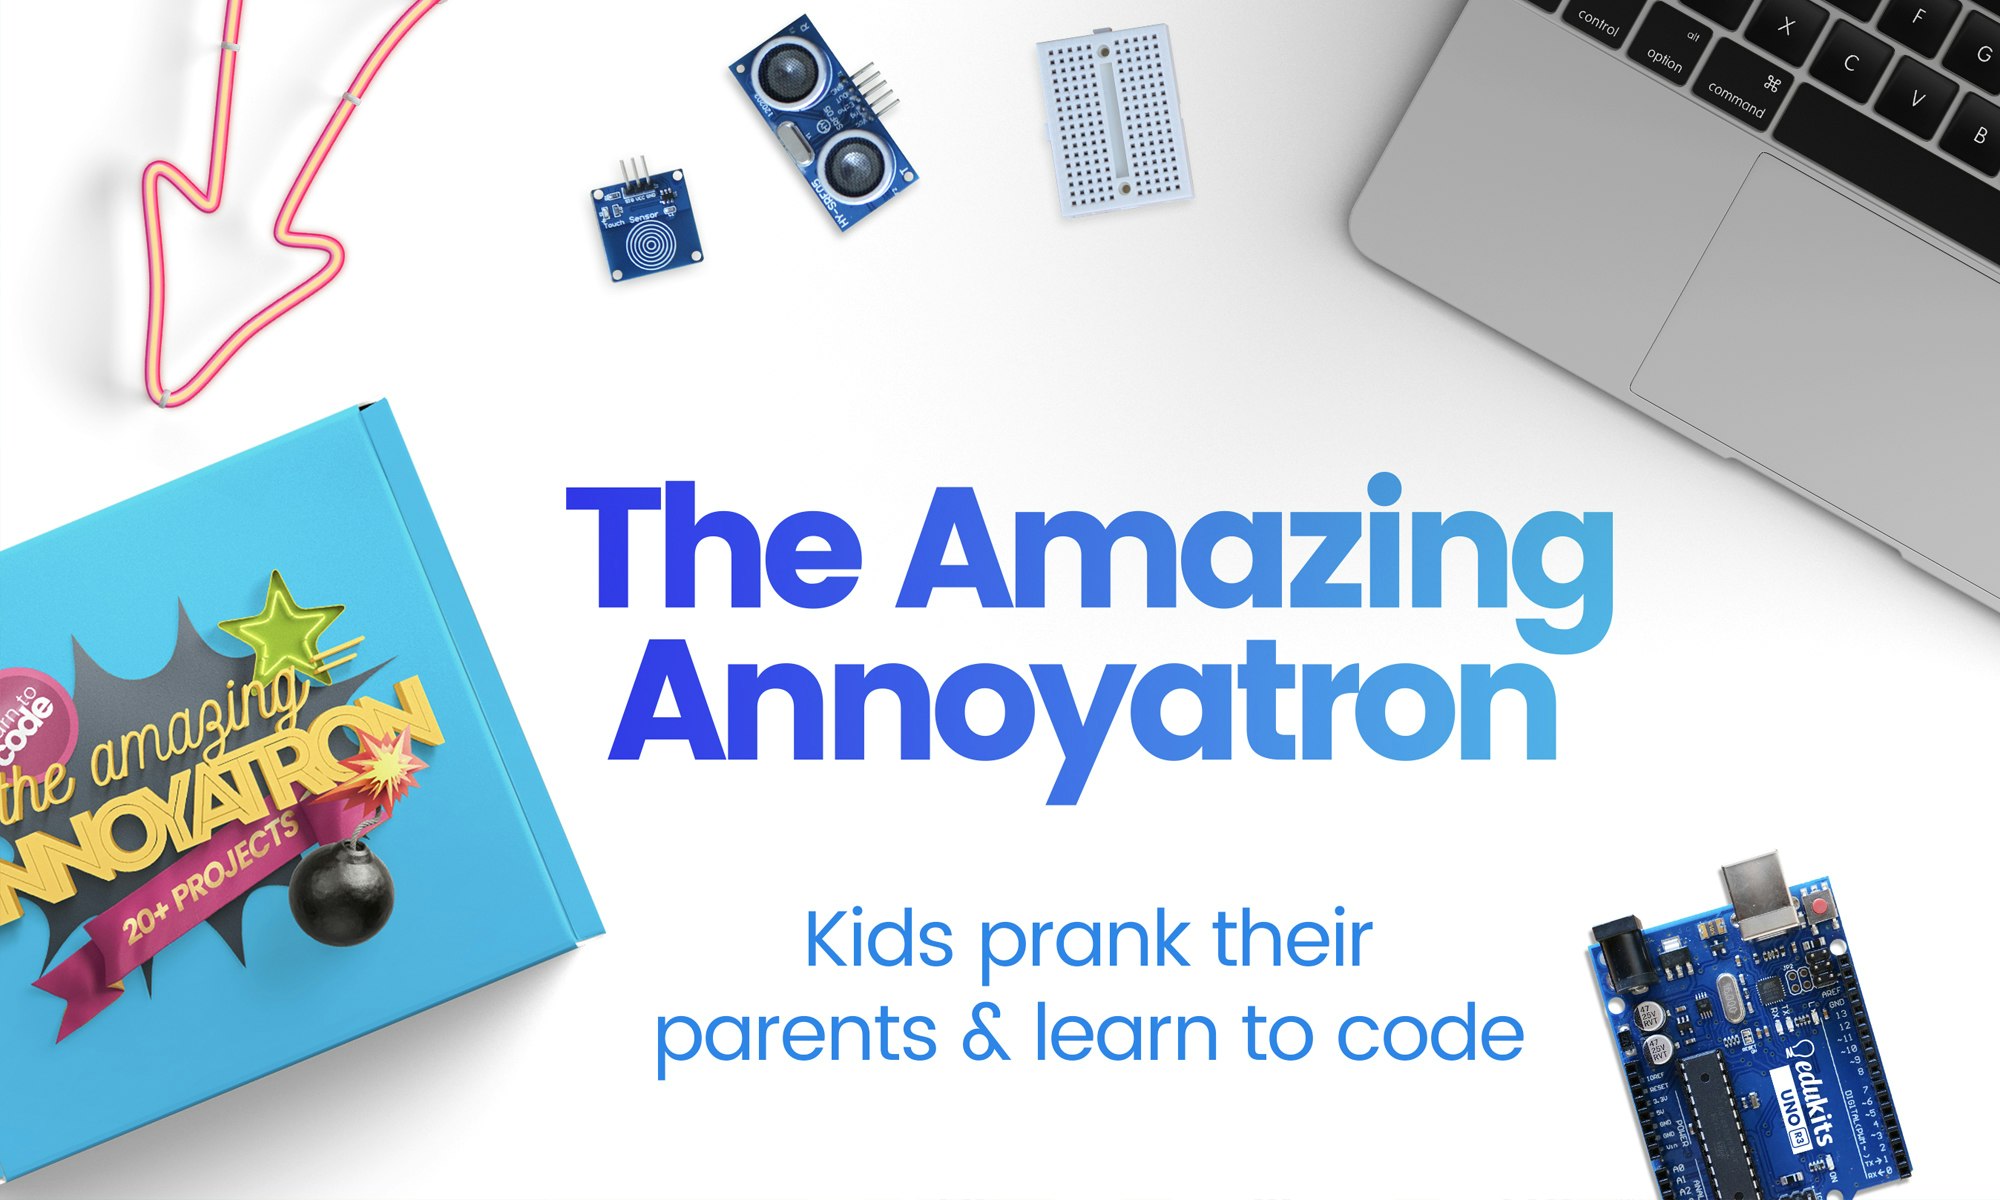 The Amazing Annoyatron Reviews - Pros & Cons 2023